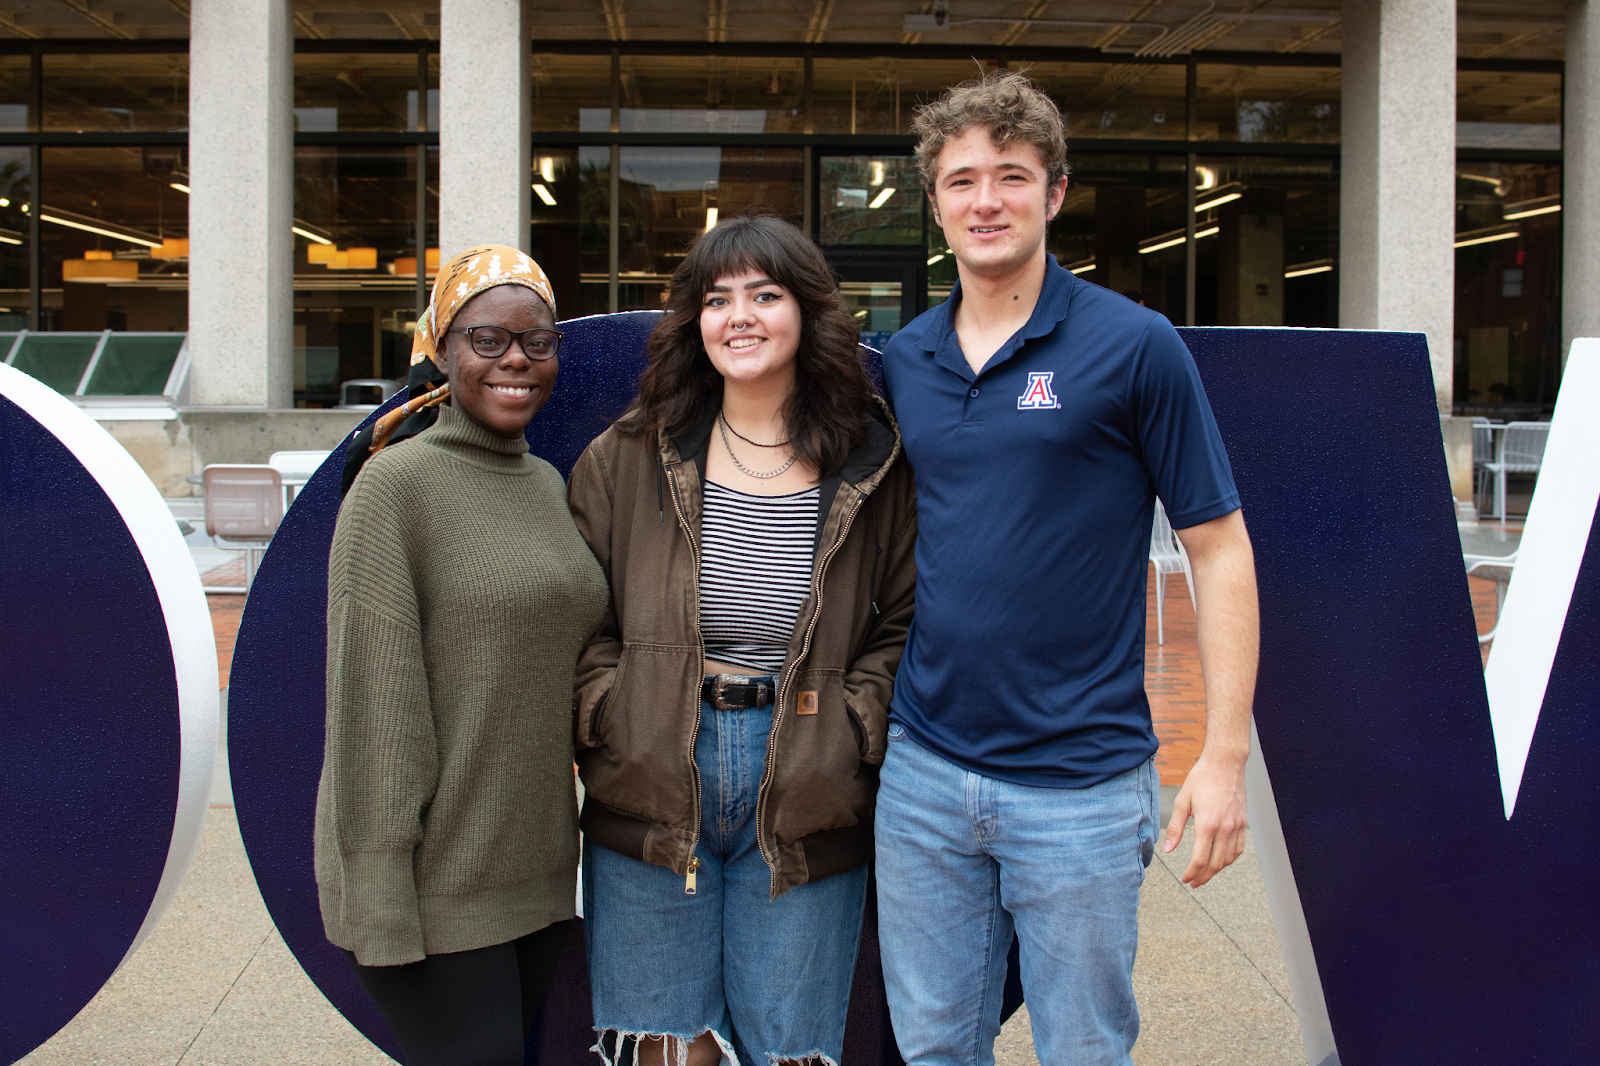 From left: Aysha Smith, Em Cuevas and Evan Laughlin 
stand in front of the University of Arizona's Main Library.
 (Courtesy of Evan Laughlin)